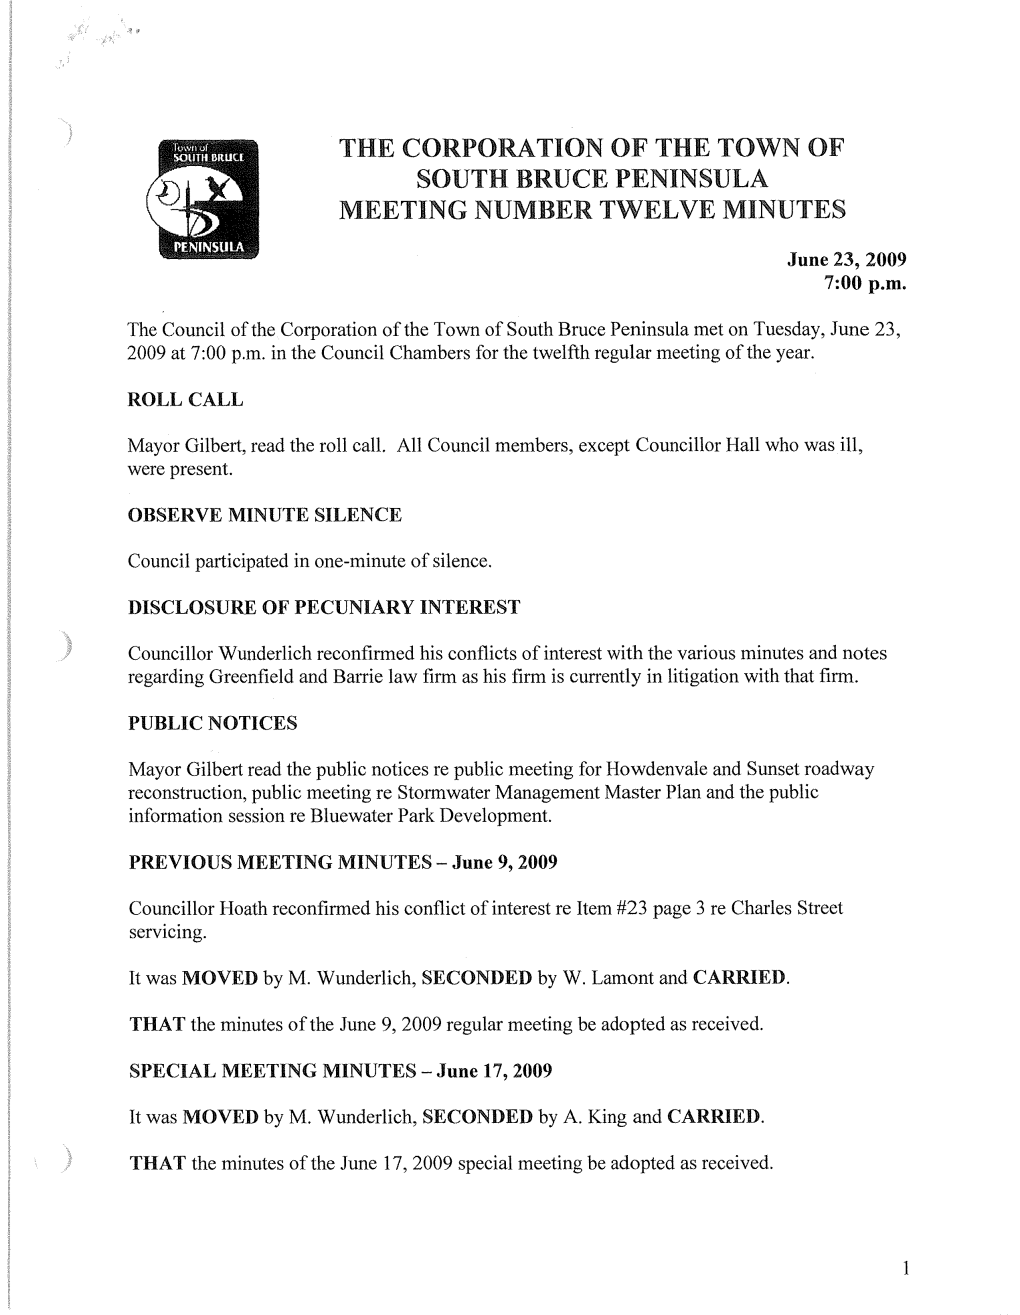 The Corpo' Tion of the Town of South Bruce Peninsula Meeting Number Twelve Minutes